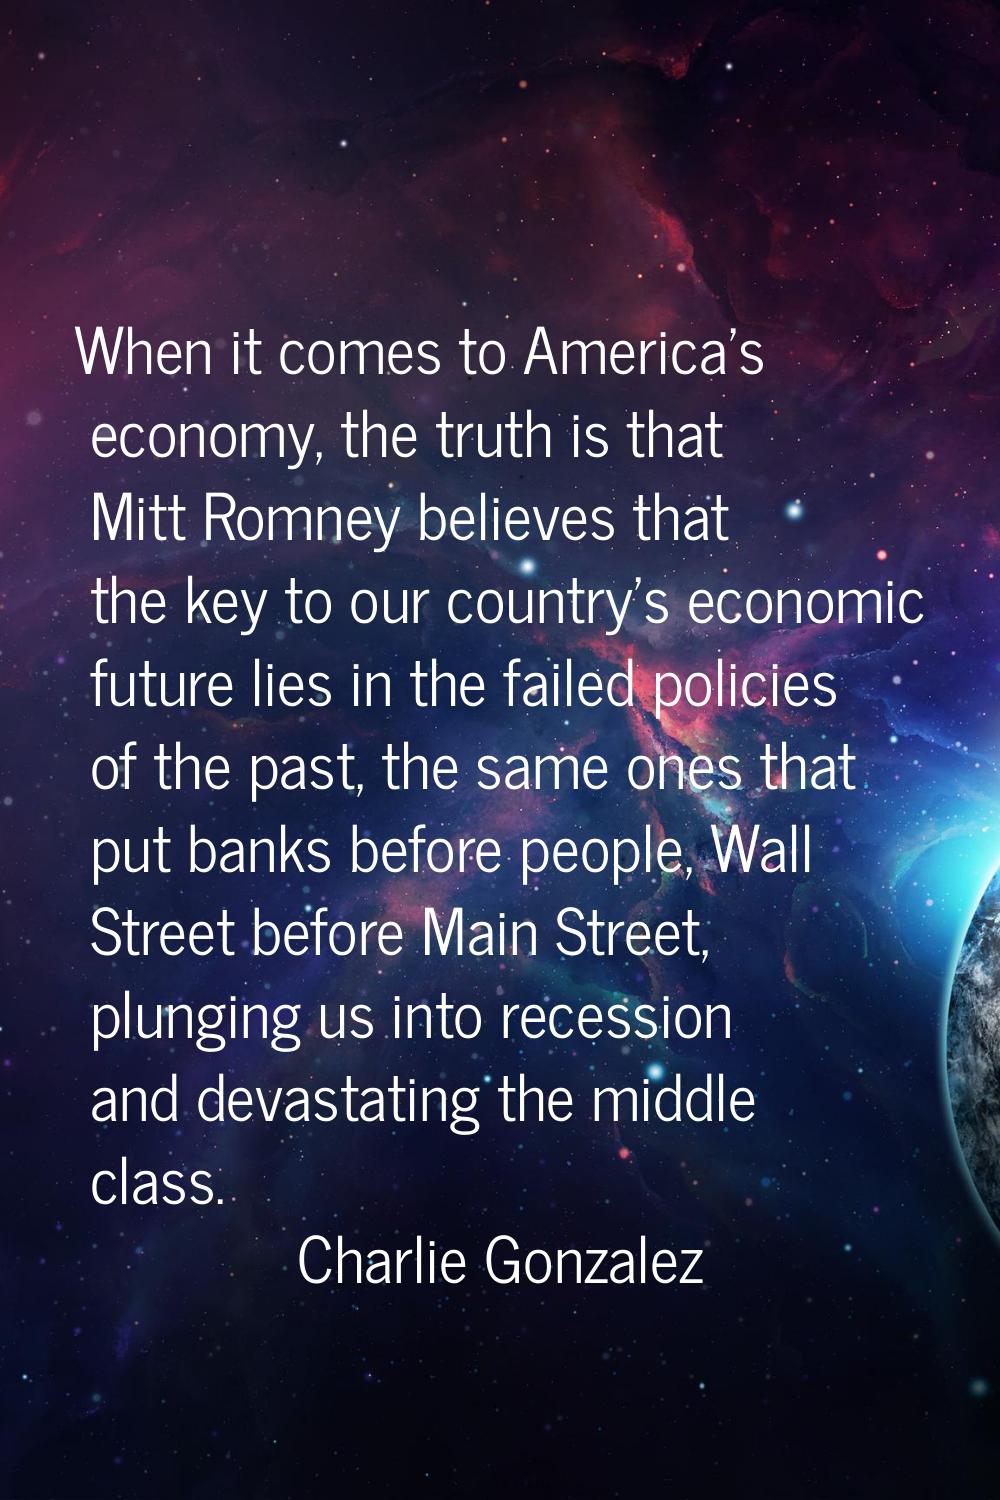 When it comes to America's economy, the truth is that Mitt Romney believes that the key to our coun